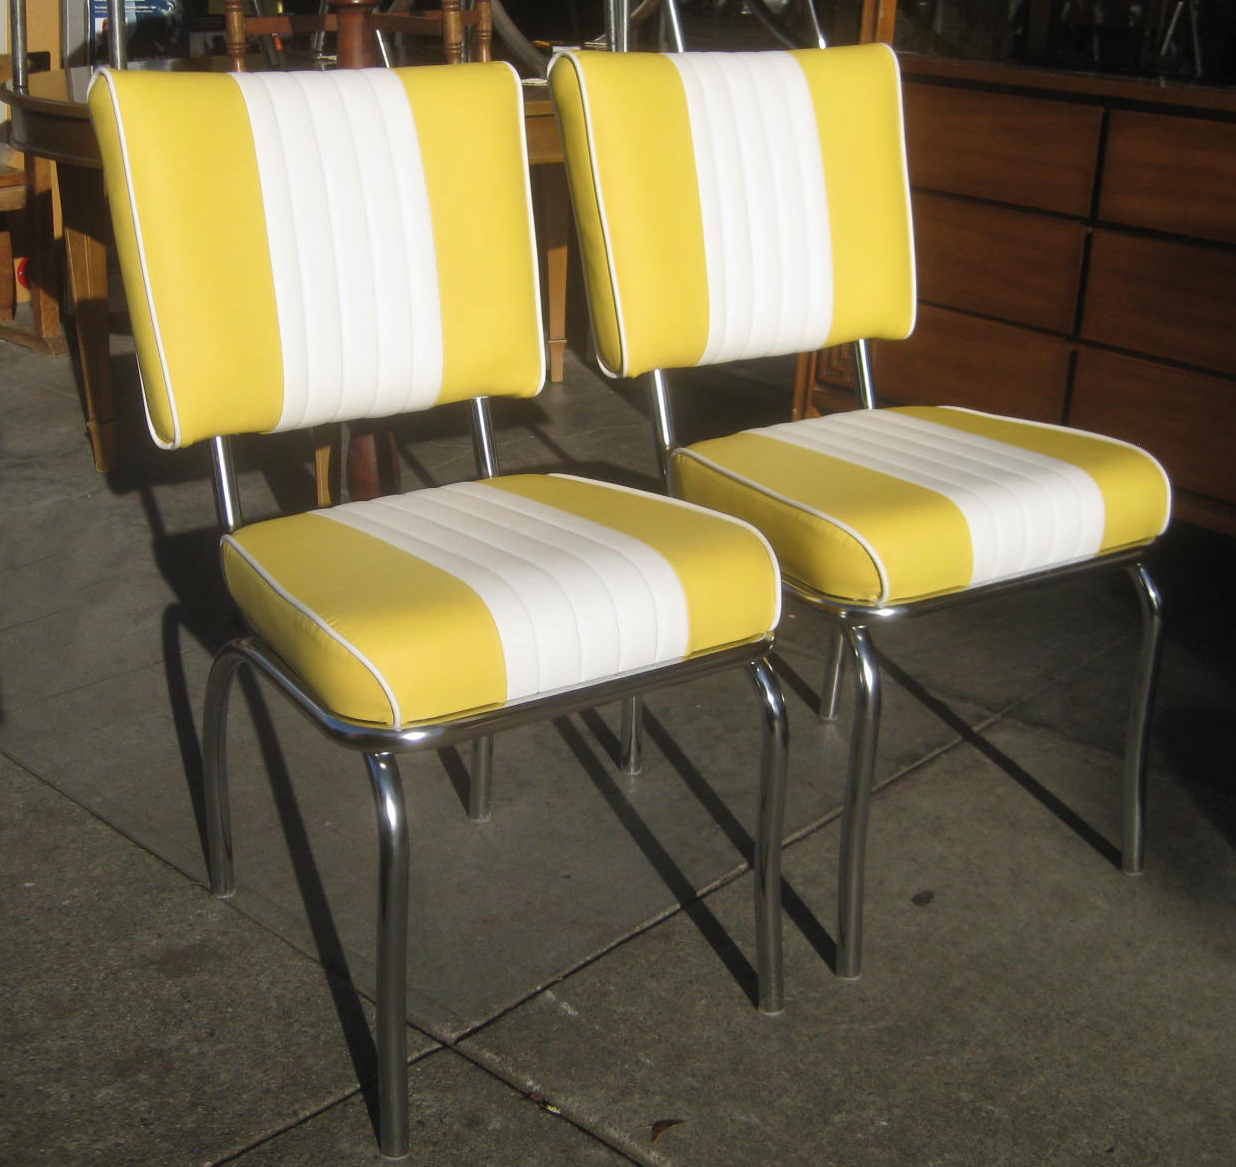 UHURU FURNITURE & COLLECTIBLES: SOLD - Bright Yellow Kitchen Chairs